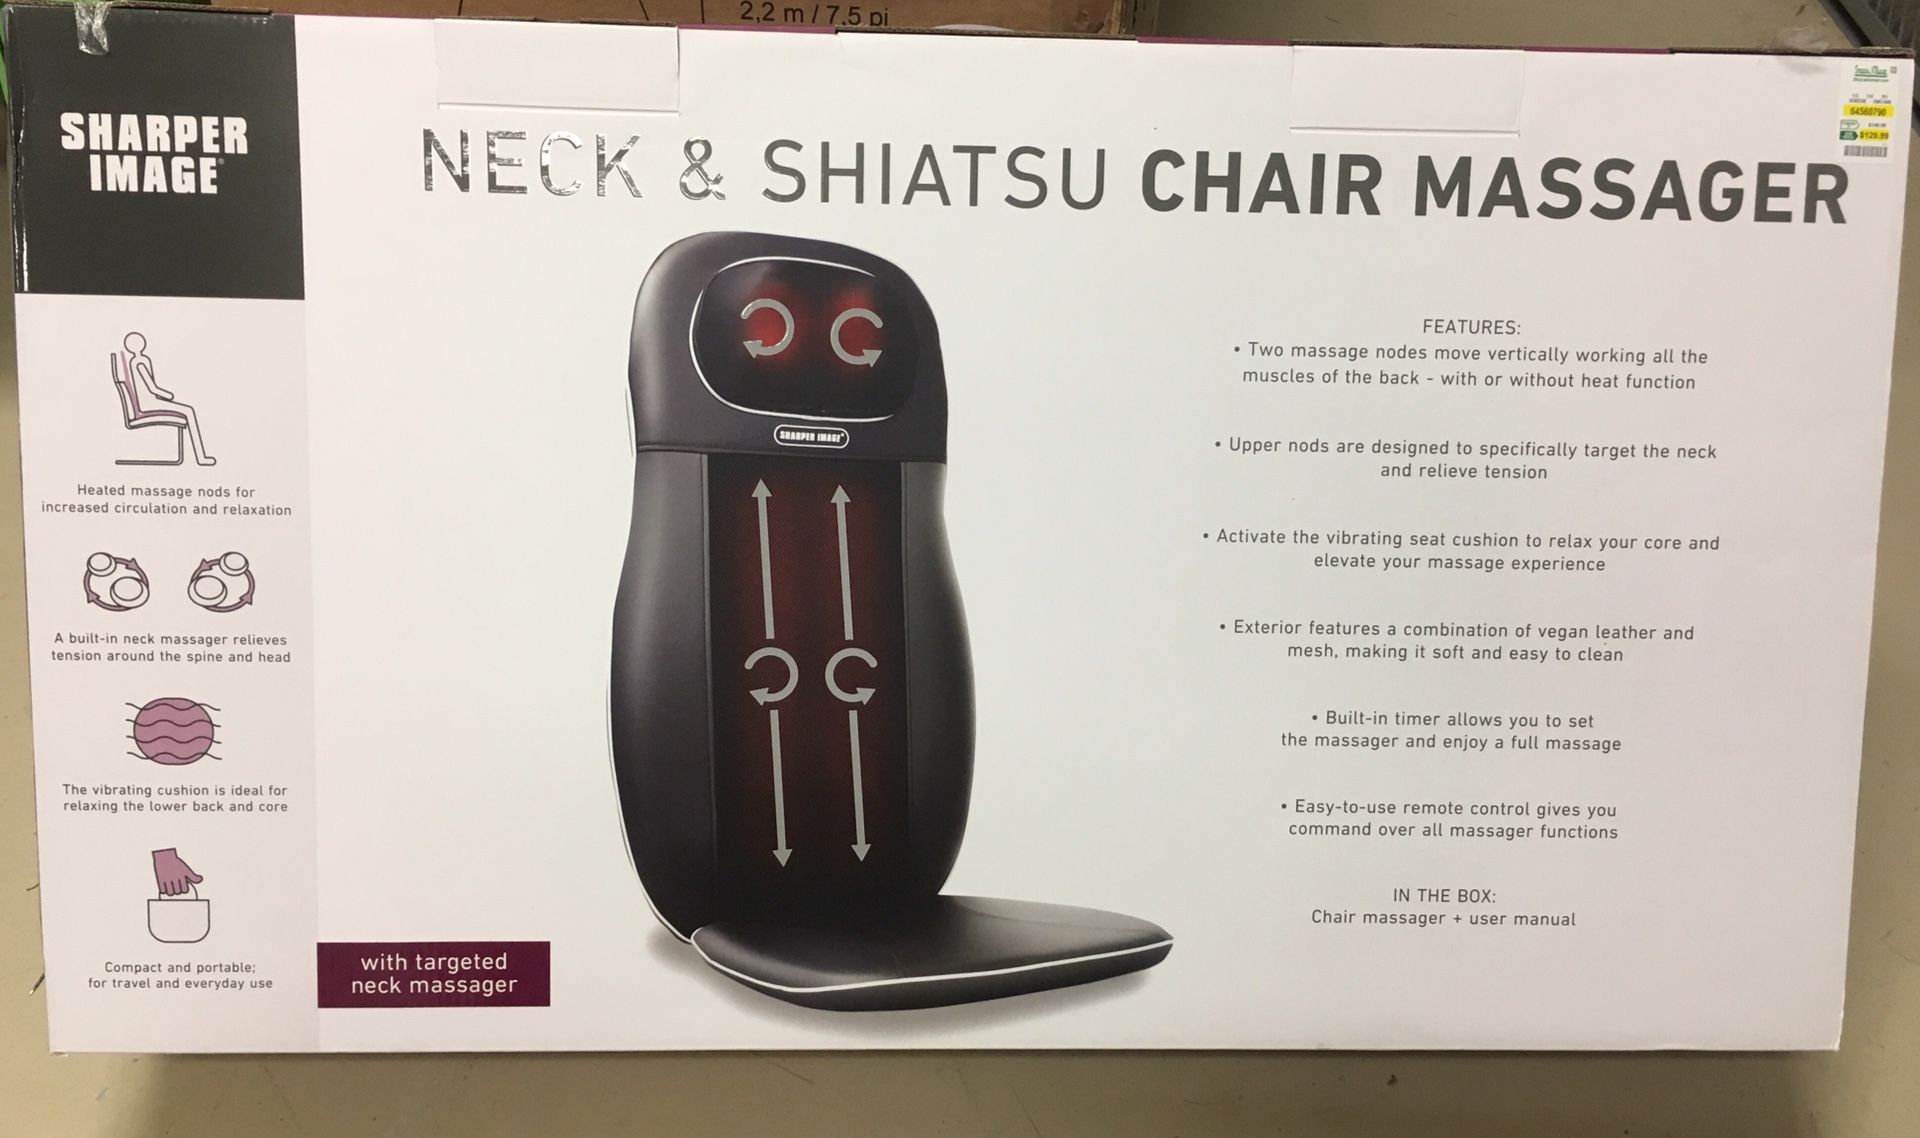 NEW in box Sharper Image Chair Massager